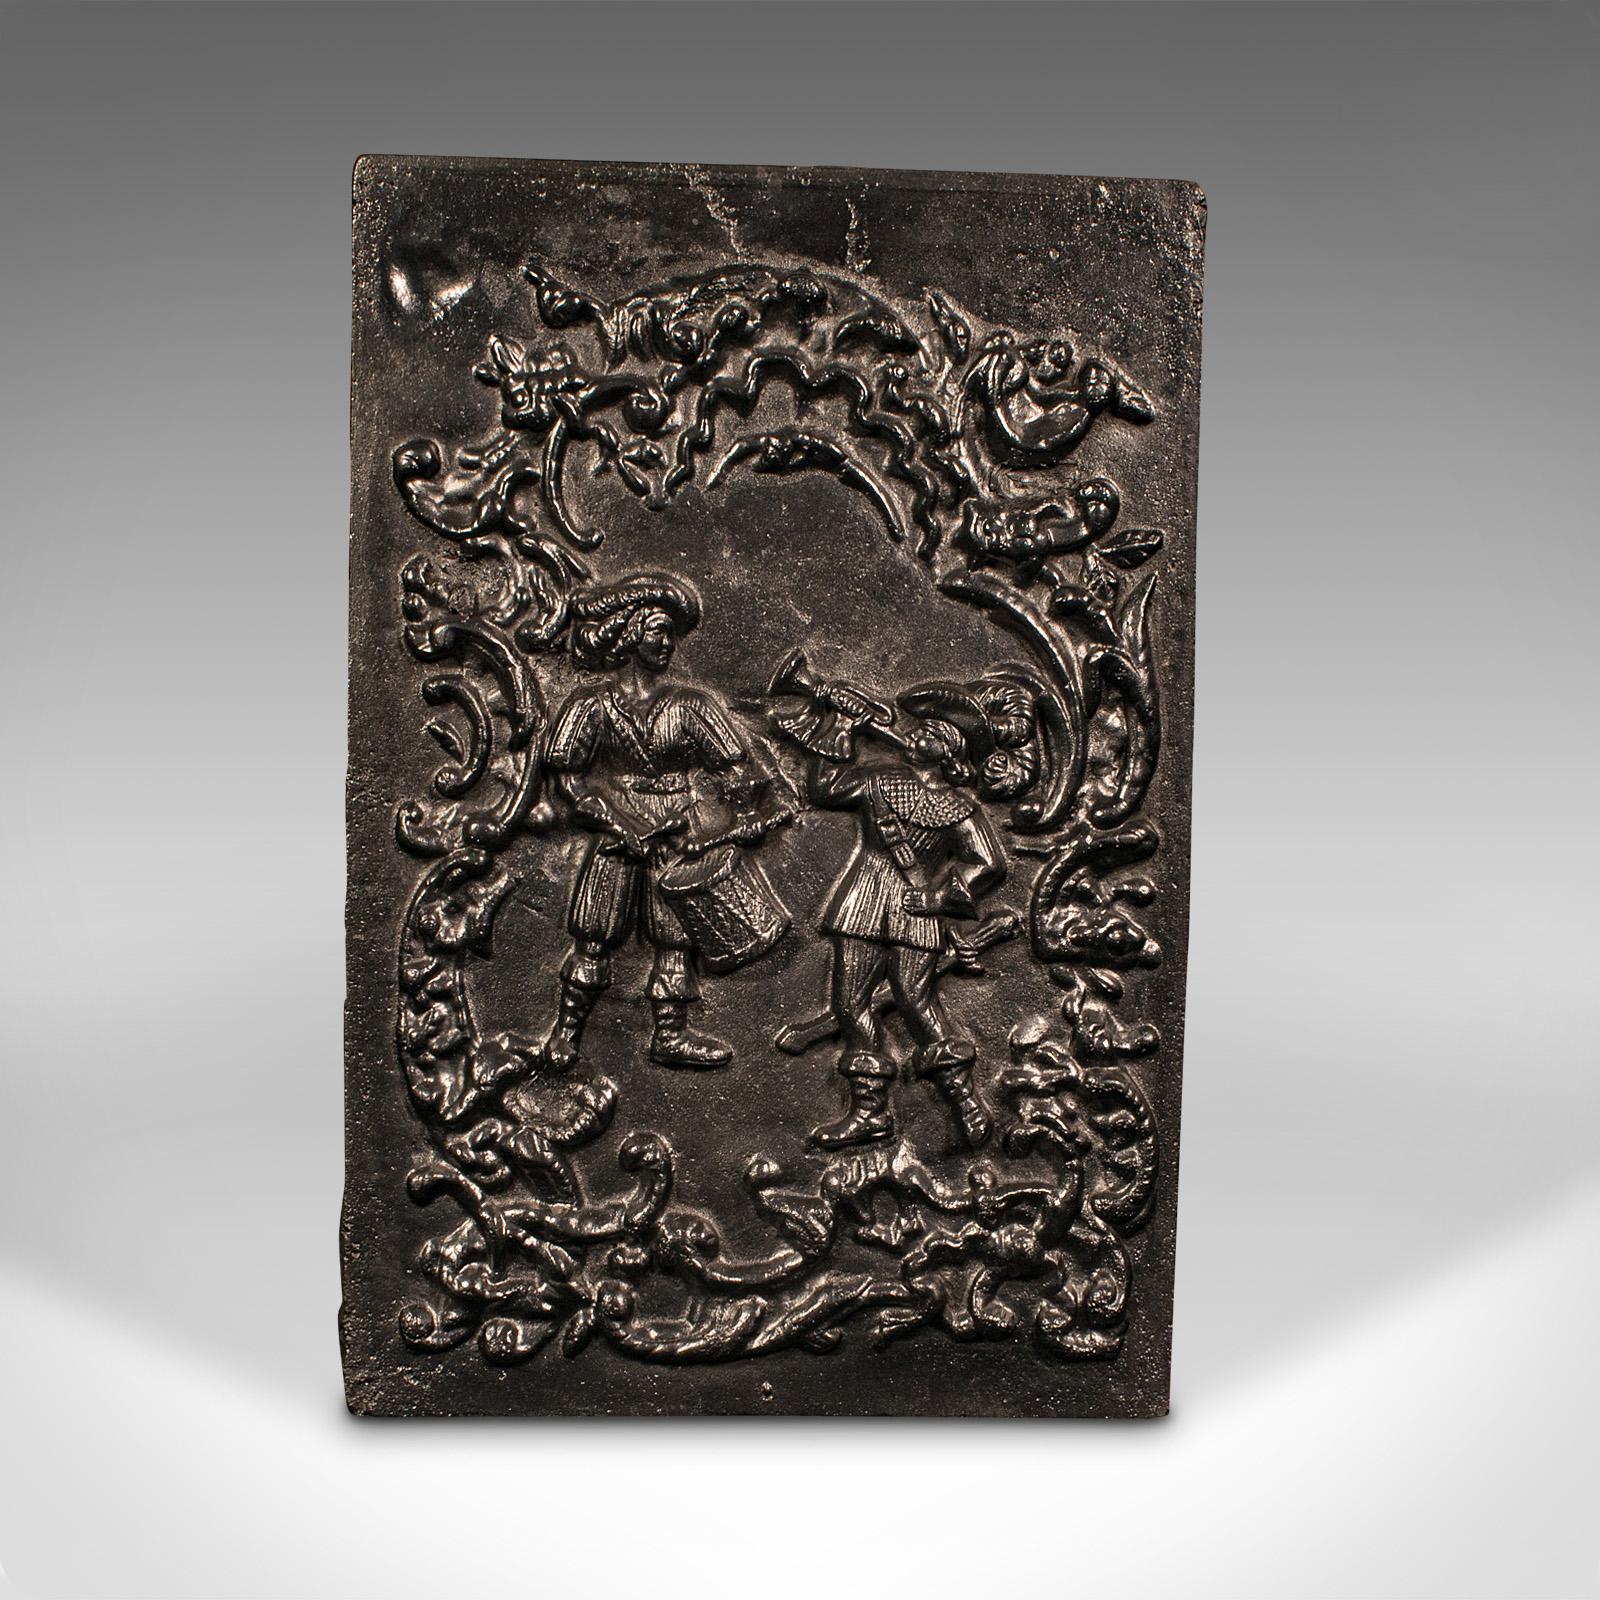 This is an antique decorative fire back. An English, cast iron hearth panel, dating to the mid Victorian period, circa 1850.

Charmingly decorative relief, ideal for adding interest to a traditional fireplace
Displaying a desirable aged patina